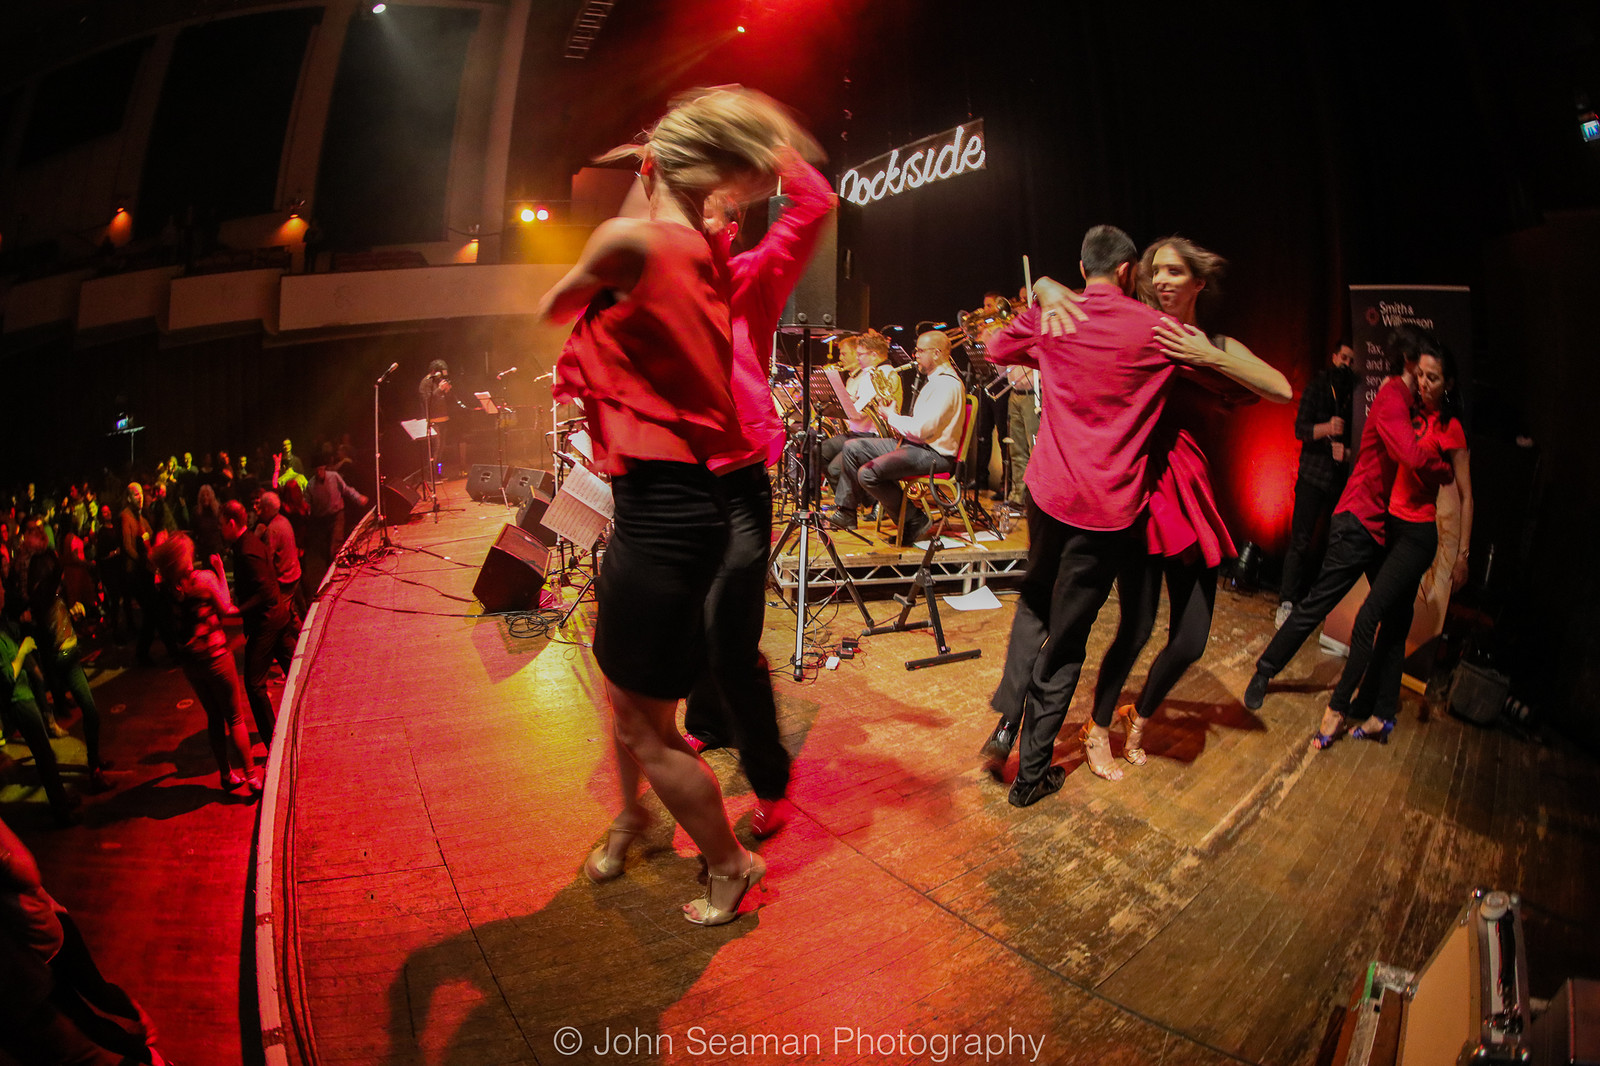 The Dockside Latin Orchestra Salsa Party at Anson Rooms